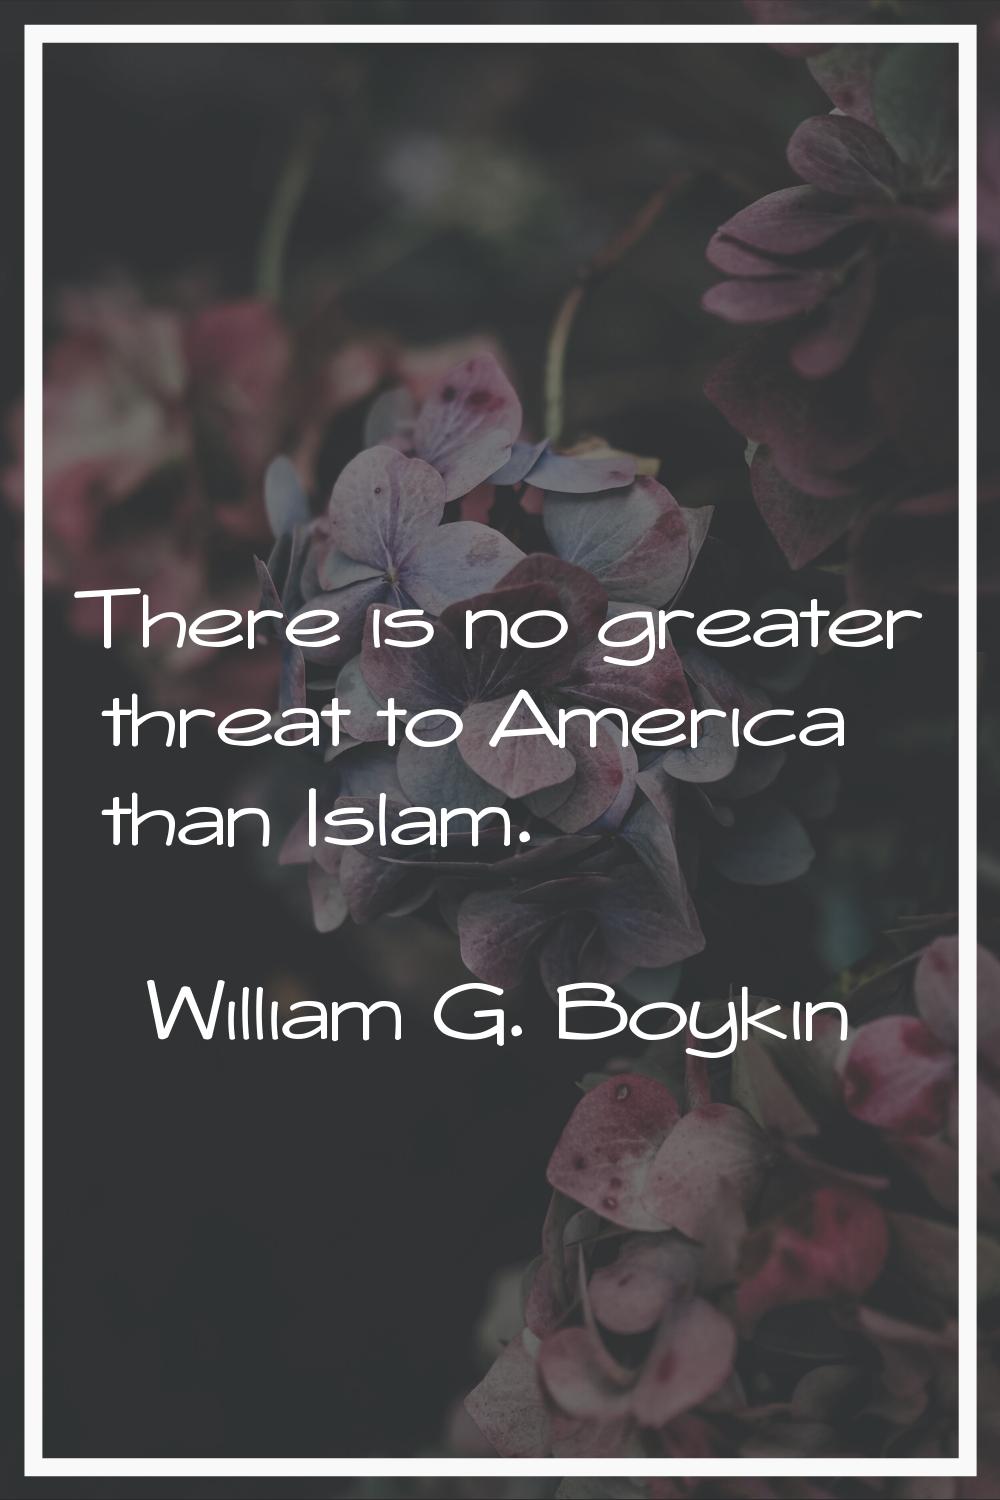 There is no greater threat to America than Islam.